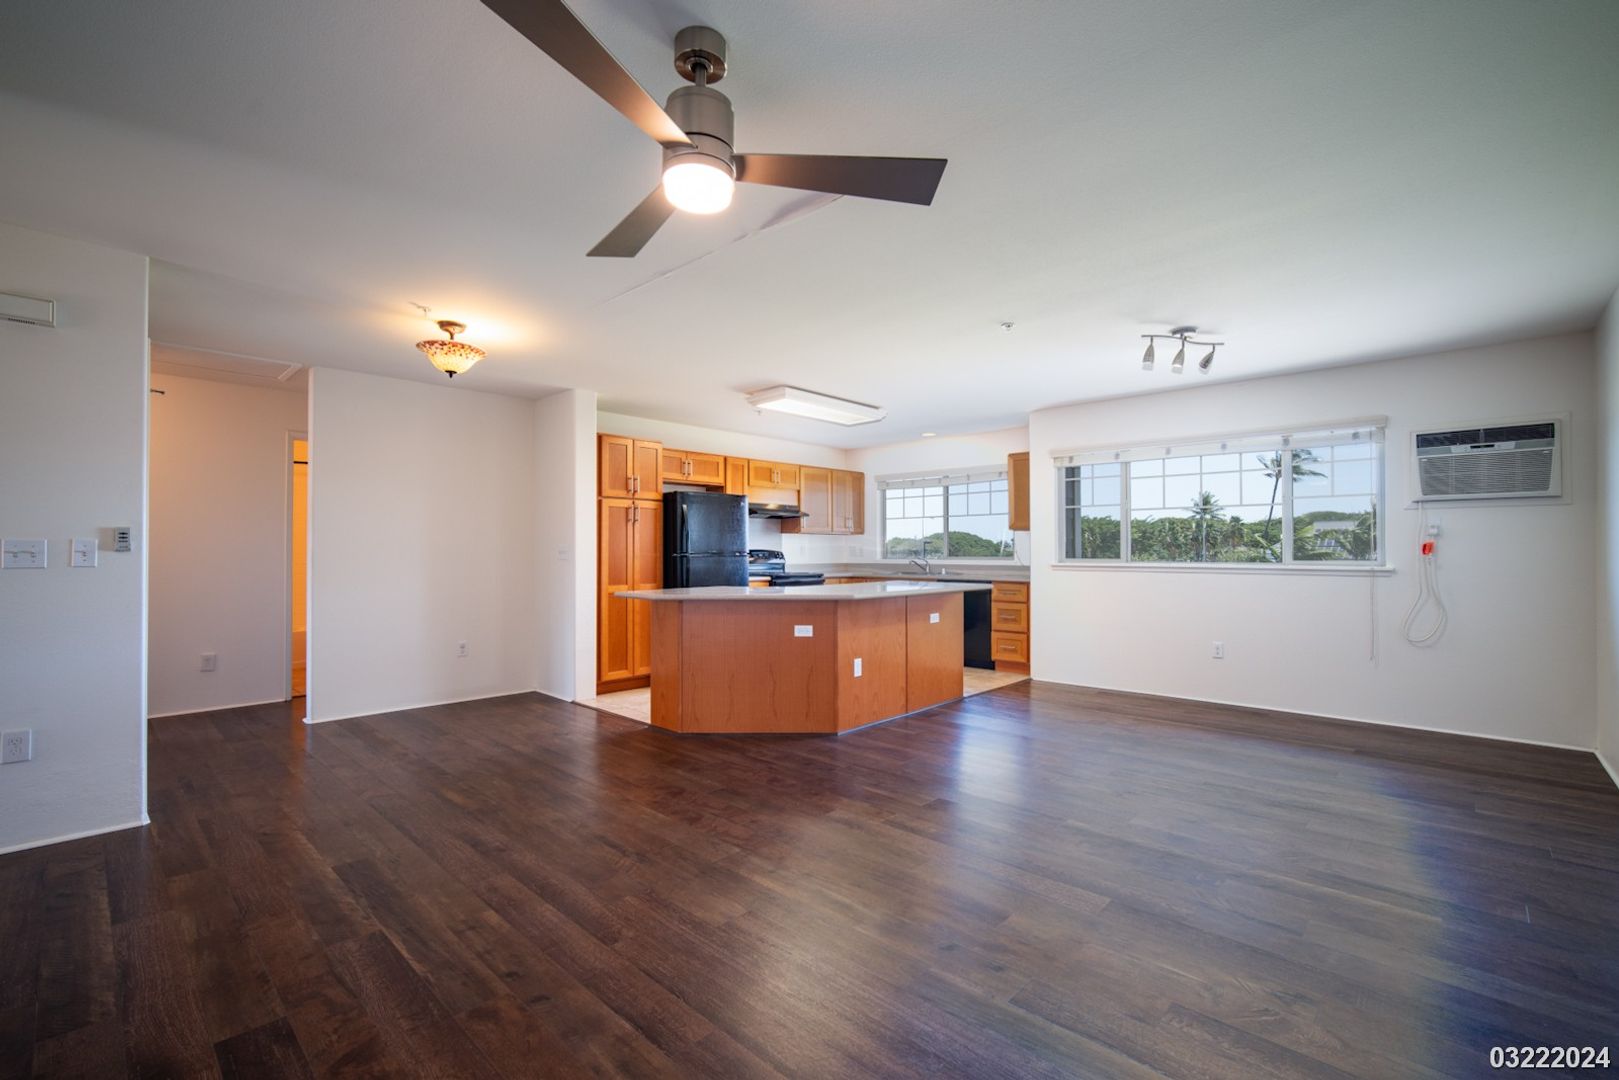 3 bed/ 2 bath townhome in Kapolei